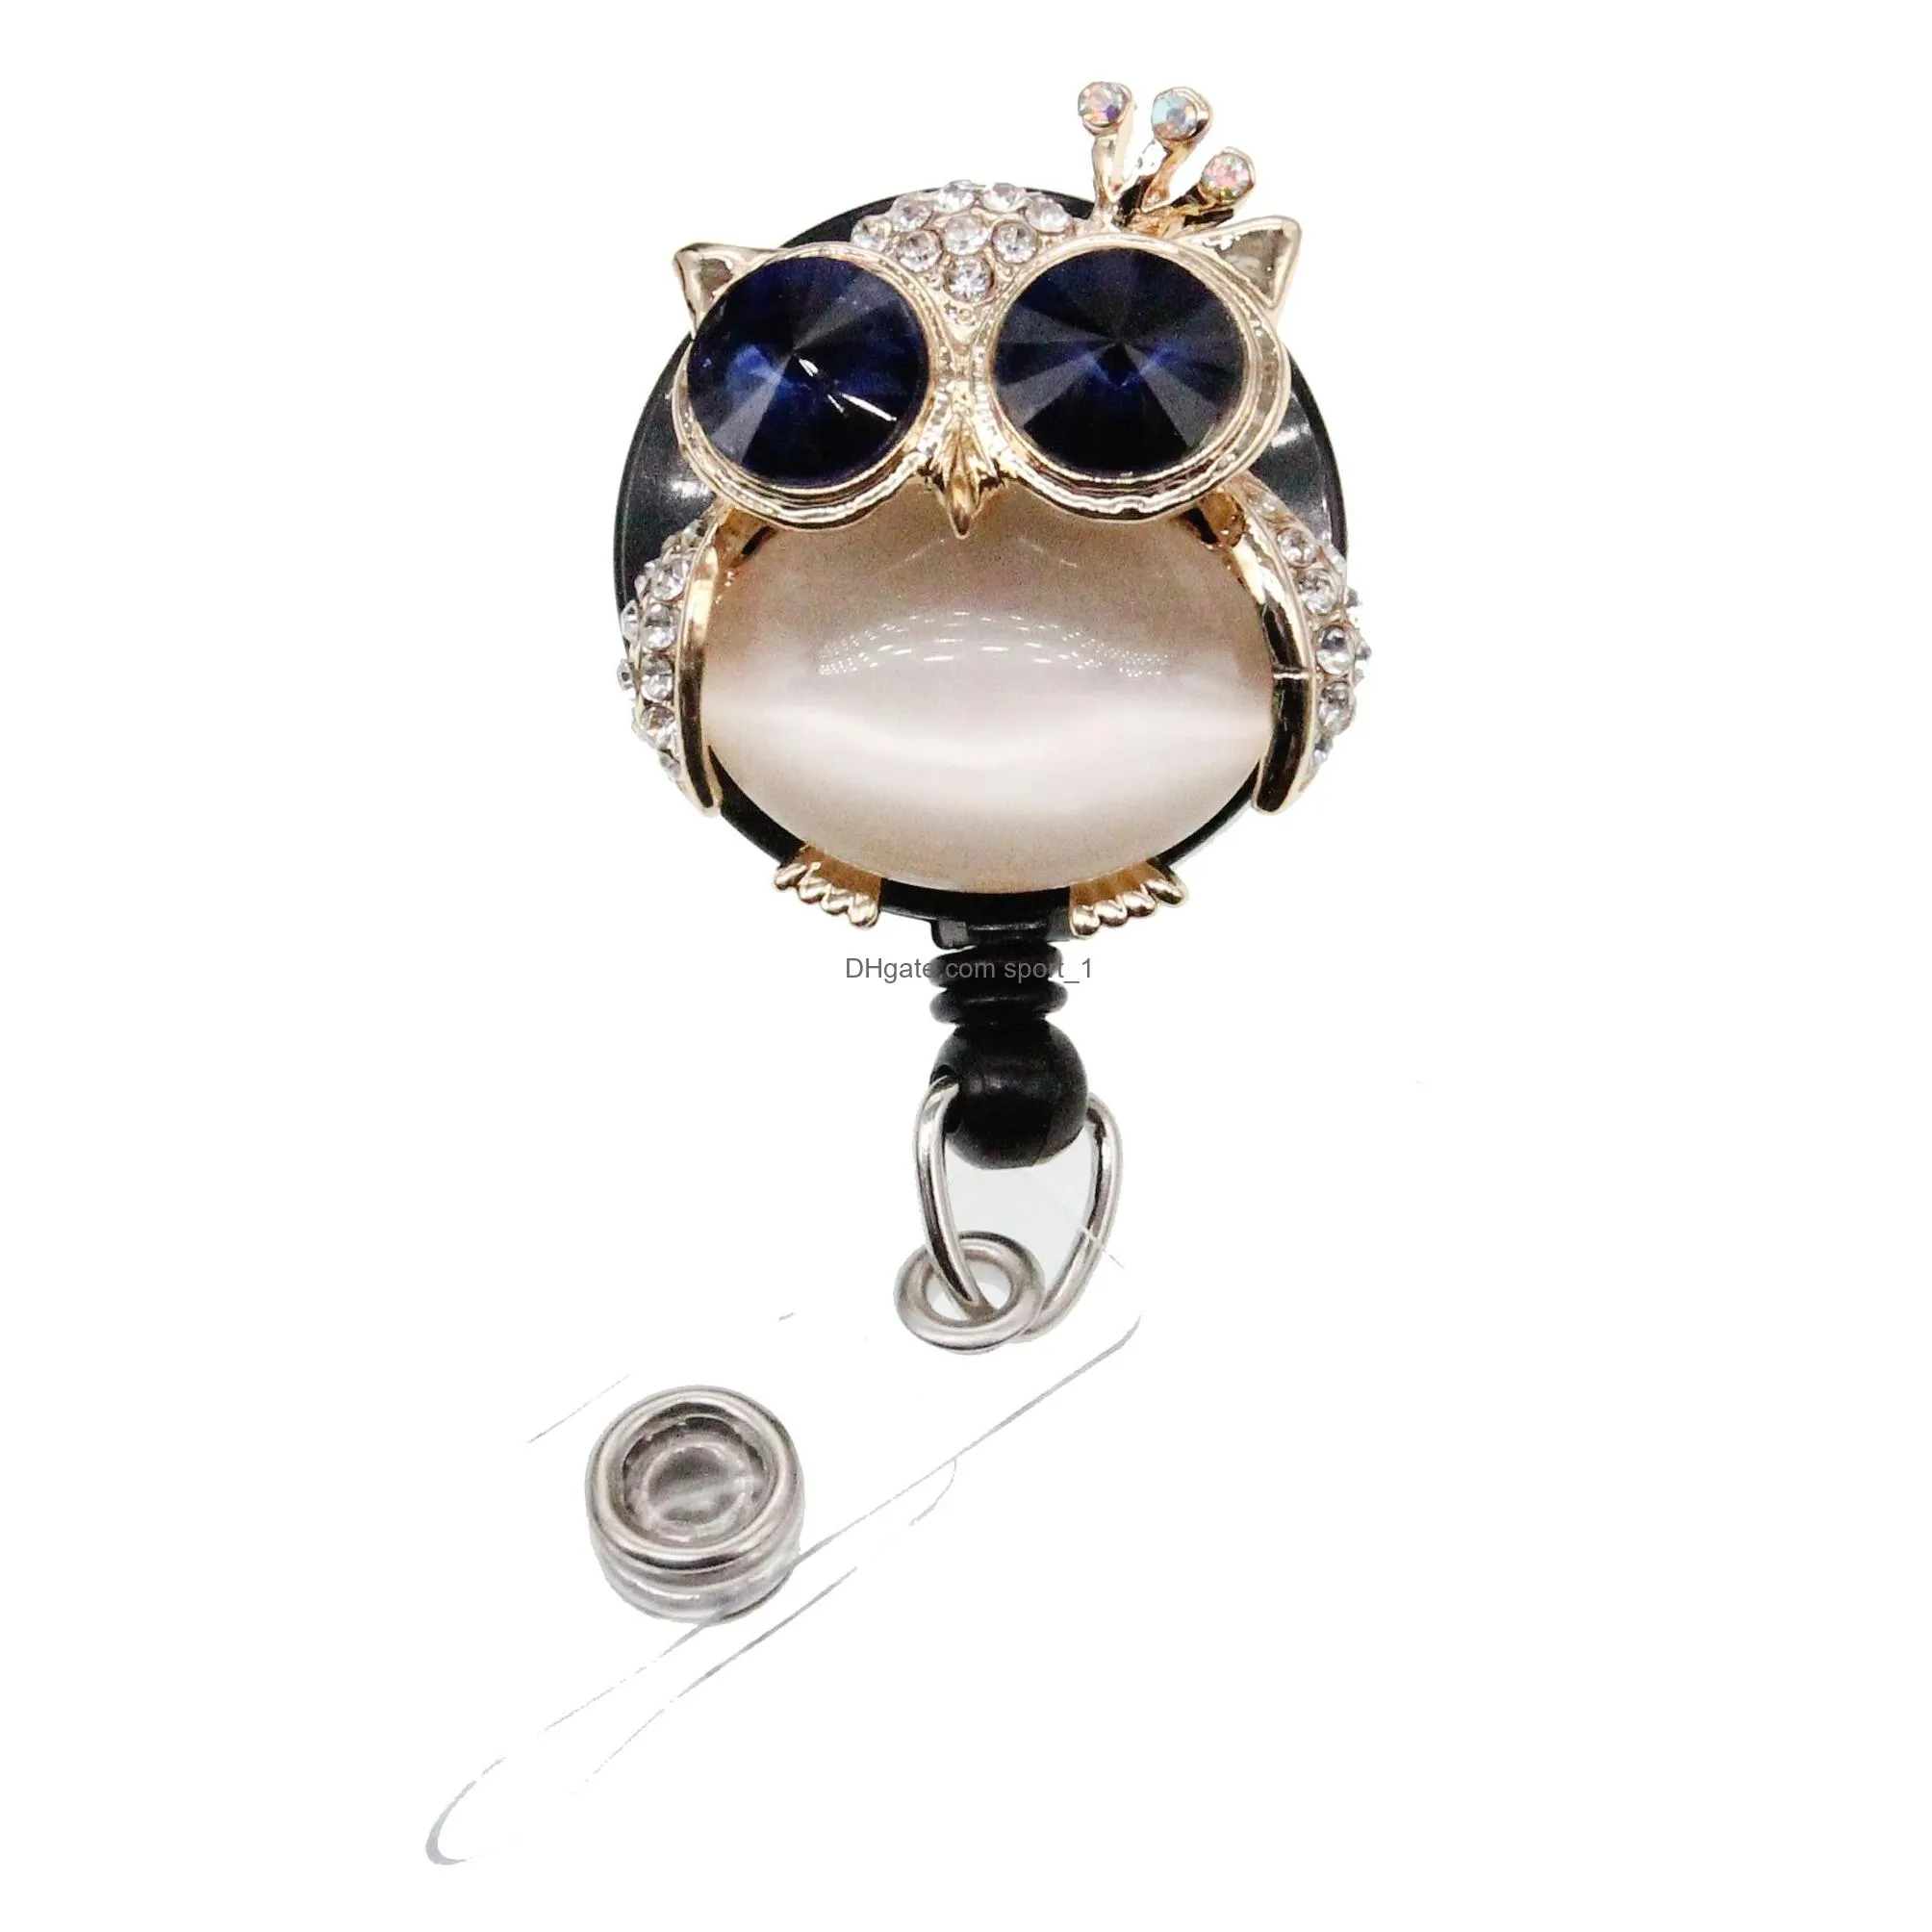 cute key rings owl animal rhinestone retractable id holder for nurse name accessories badge reel with alligator clip